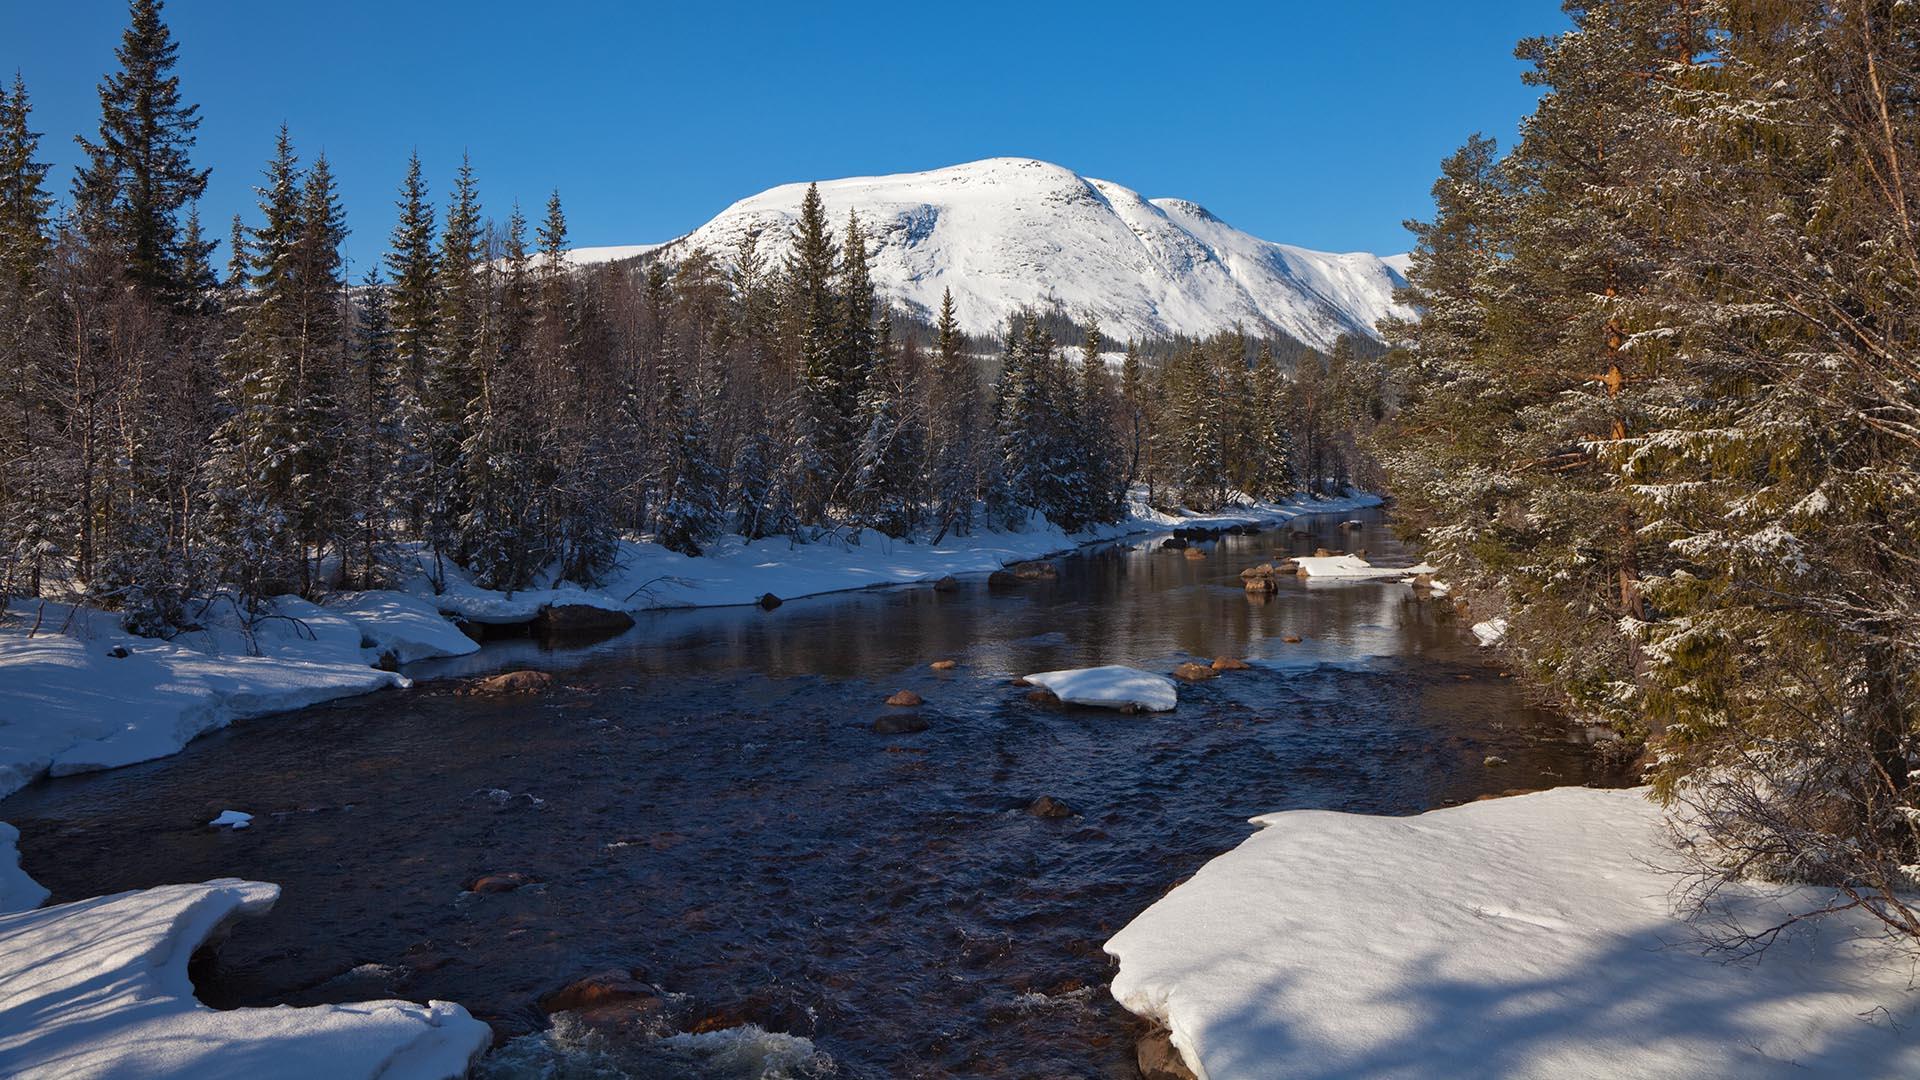 A sunny winter day with an open river running through spruce forest and a snow-covered mountain in the background.